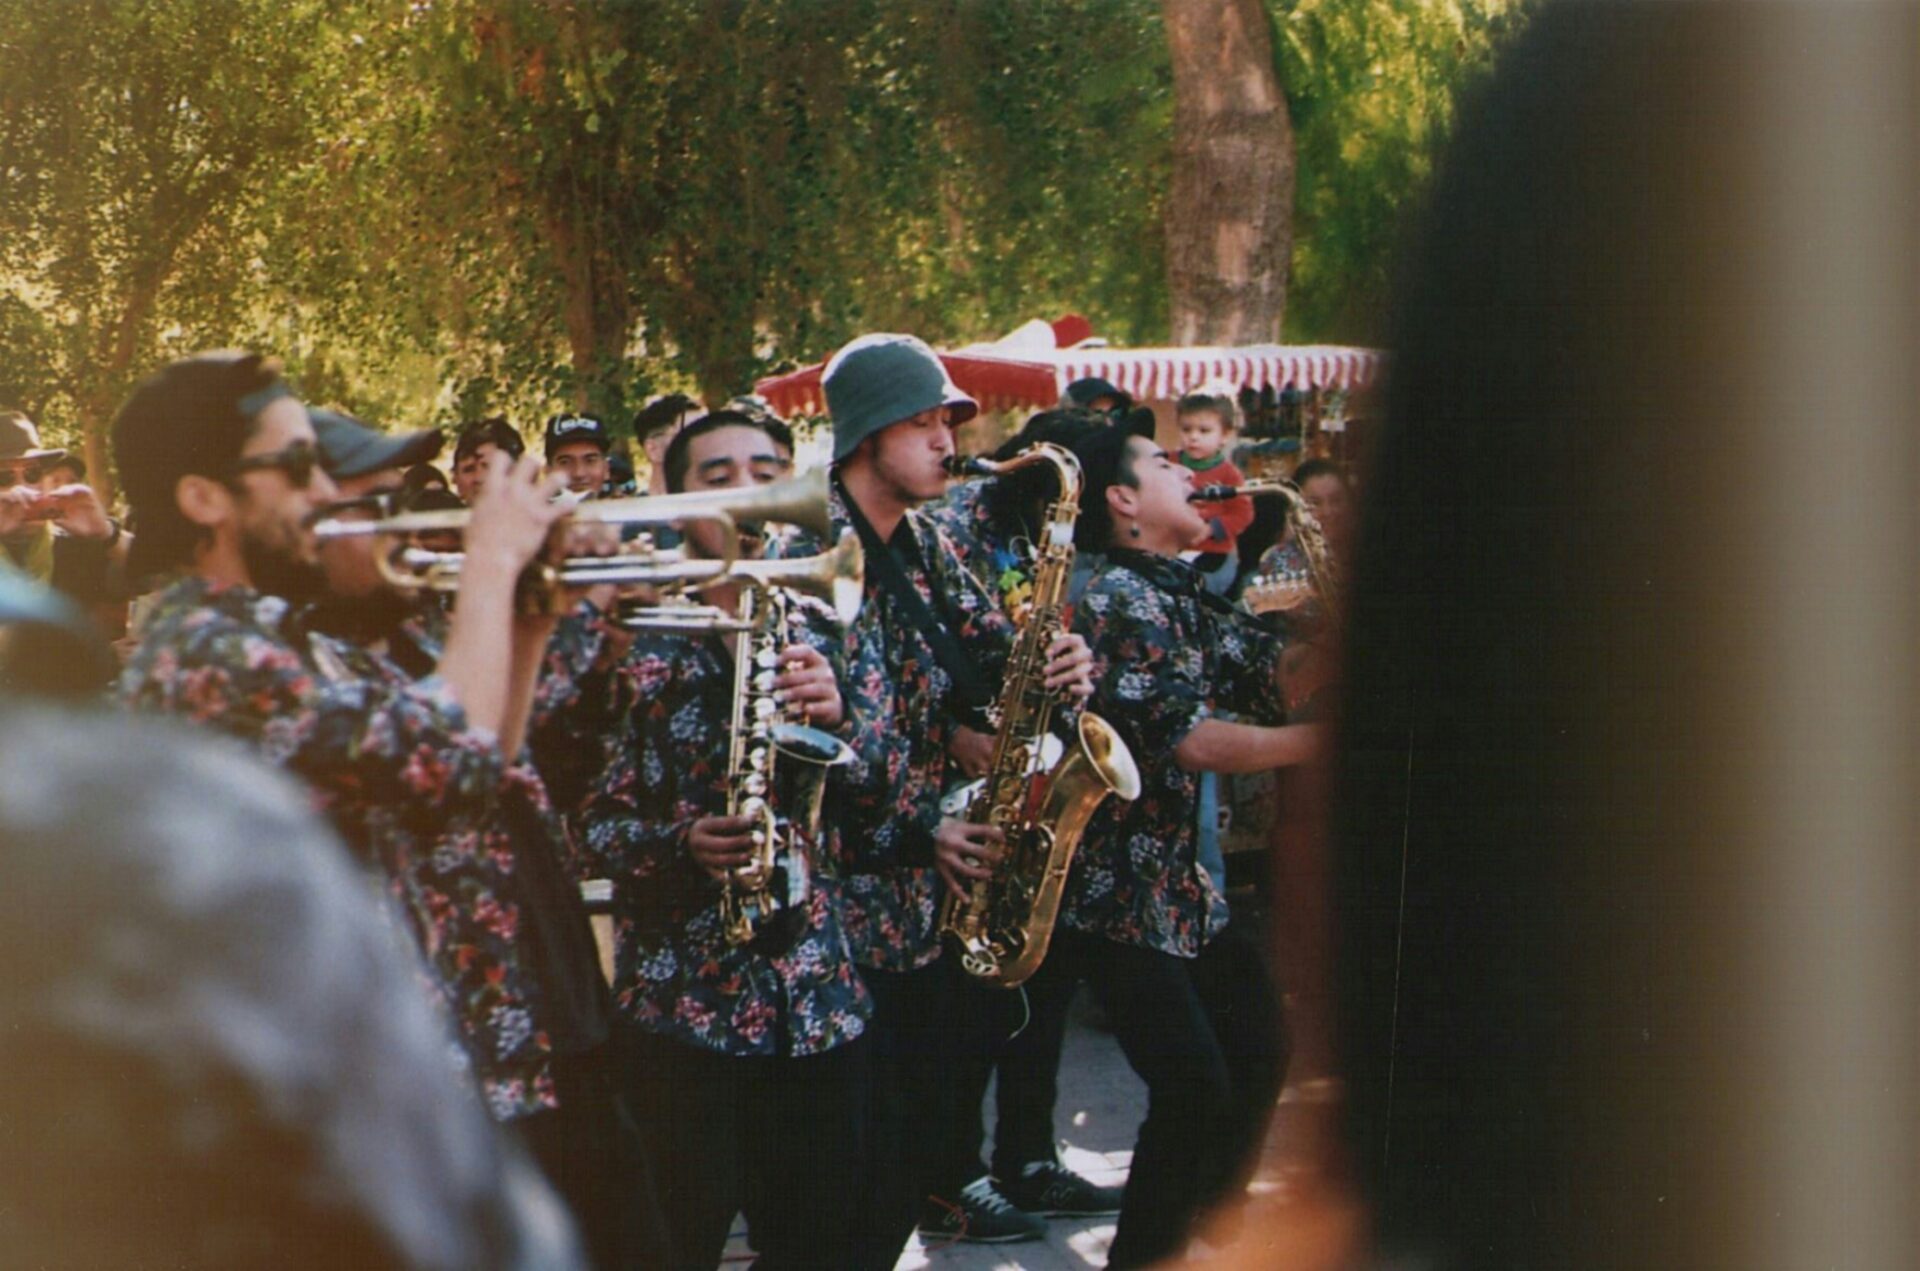 A photograph of musicians playing saxophones on the streets in Vicuña, La Serena, Chile (Jael Rodriguez via Unsplash)